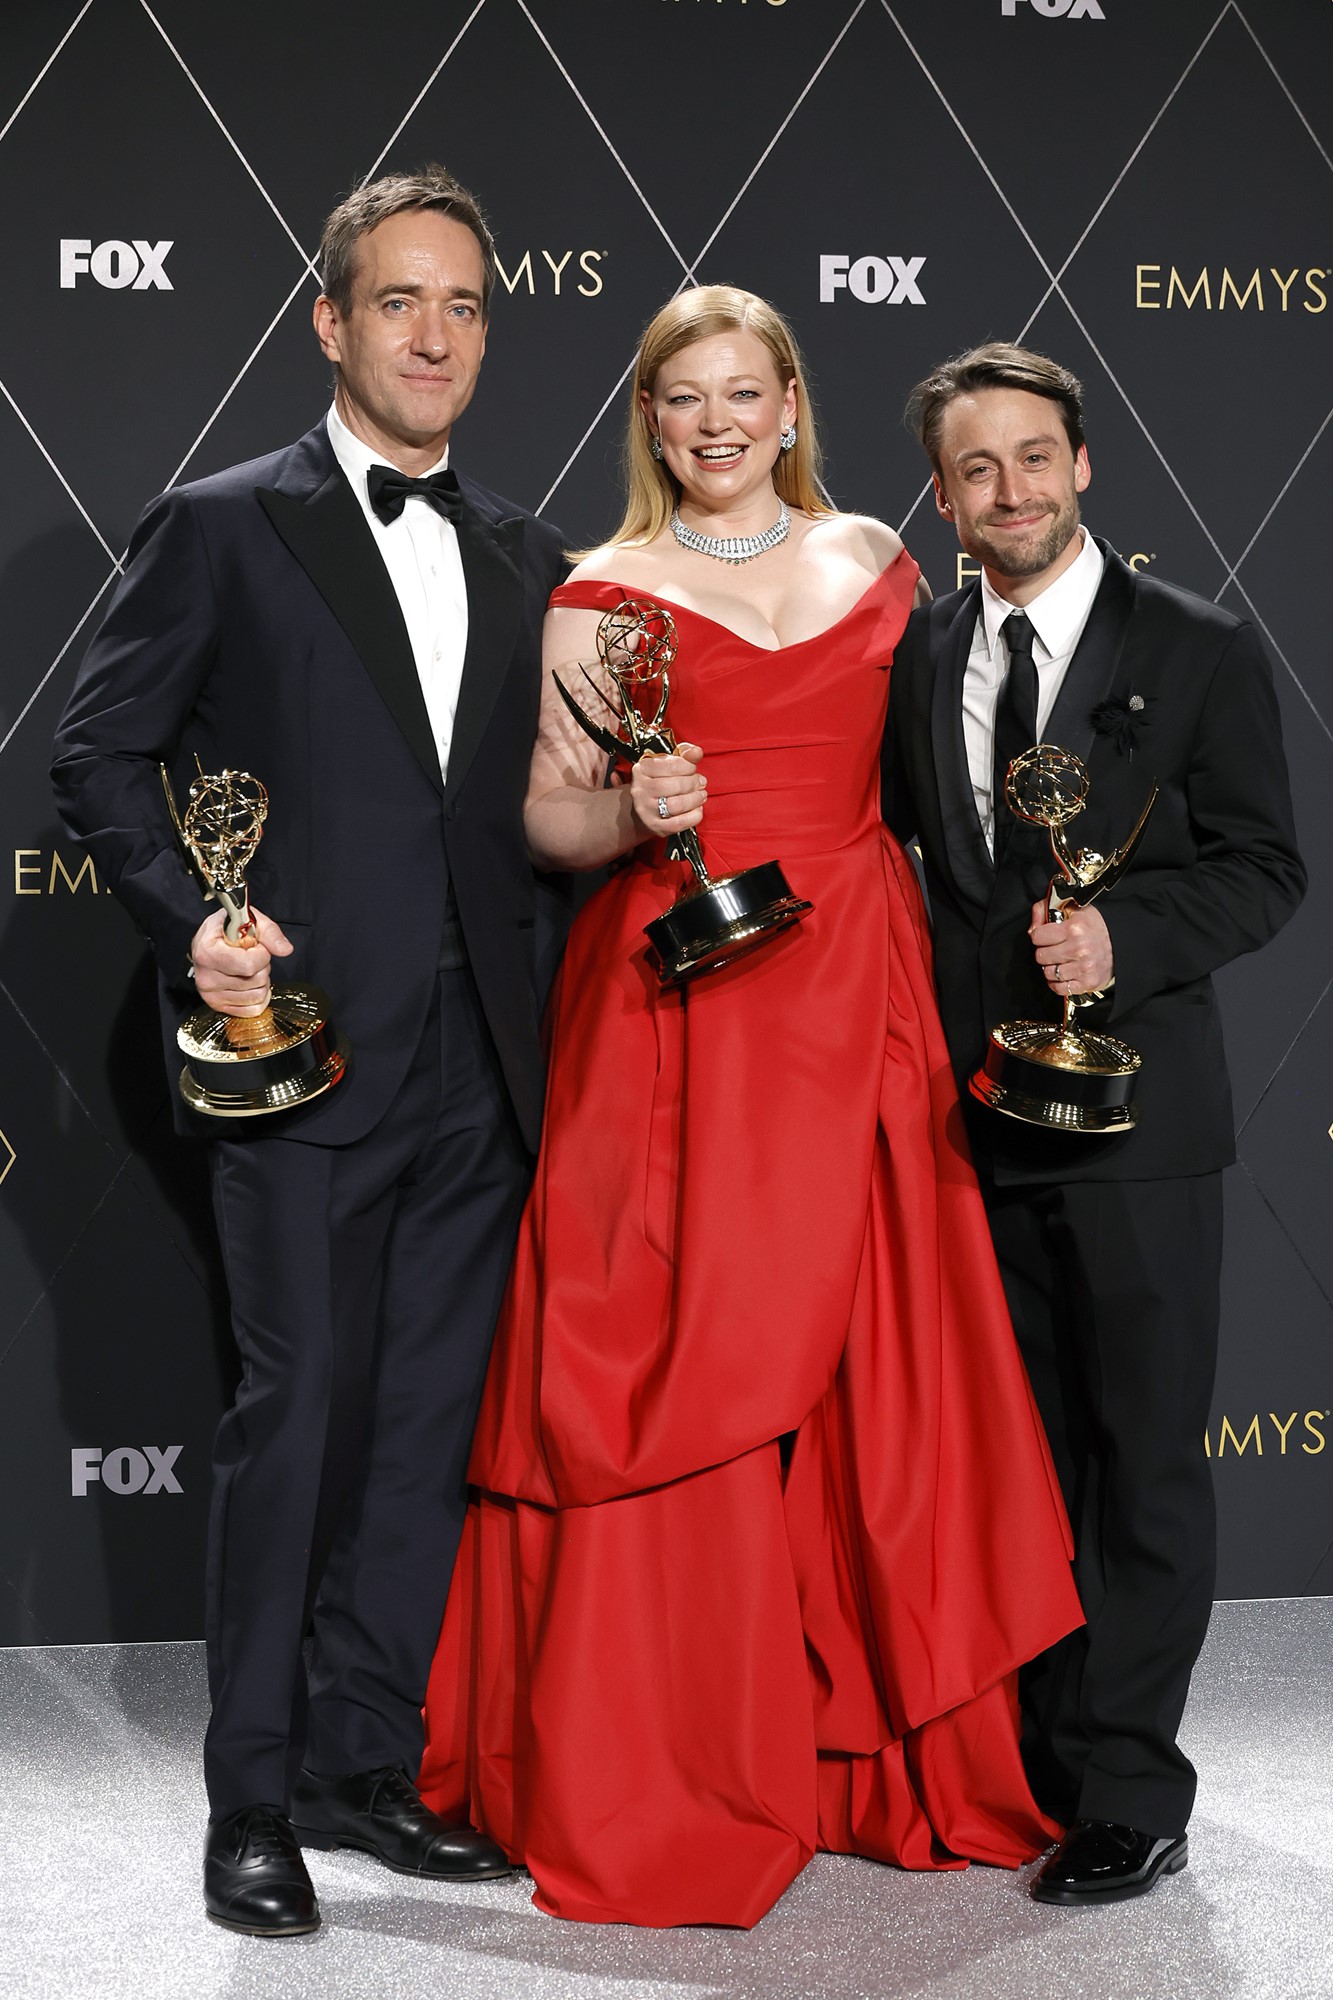 The three actors smile and hold up their gold Emmy statues.